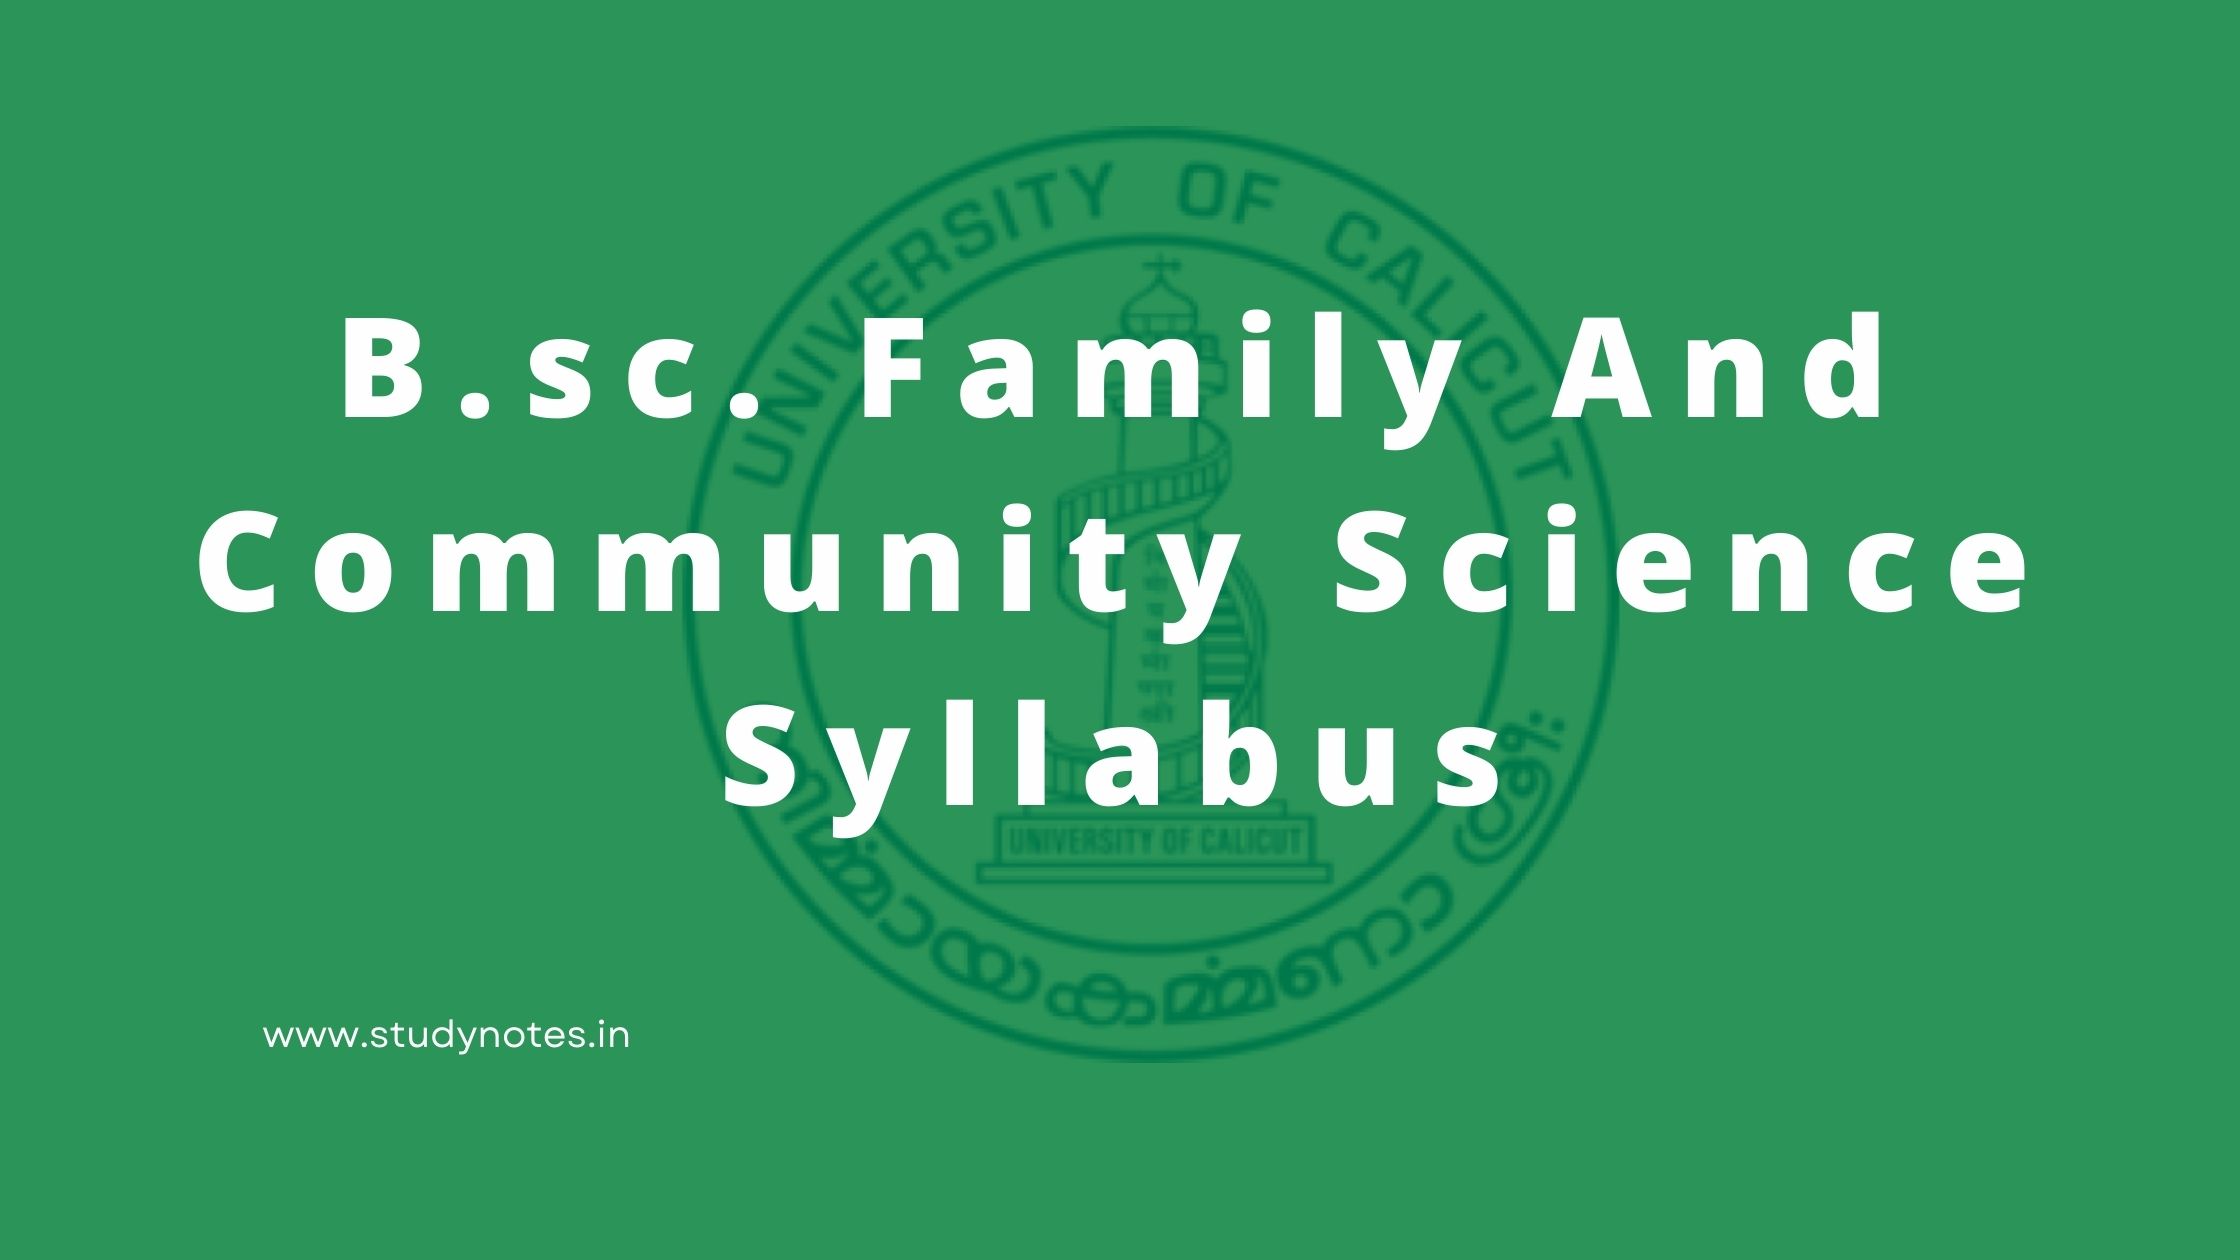 B.sc. Family And Community Science Syllabus